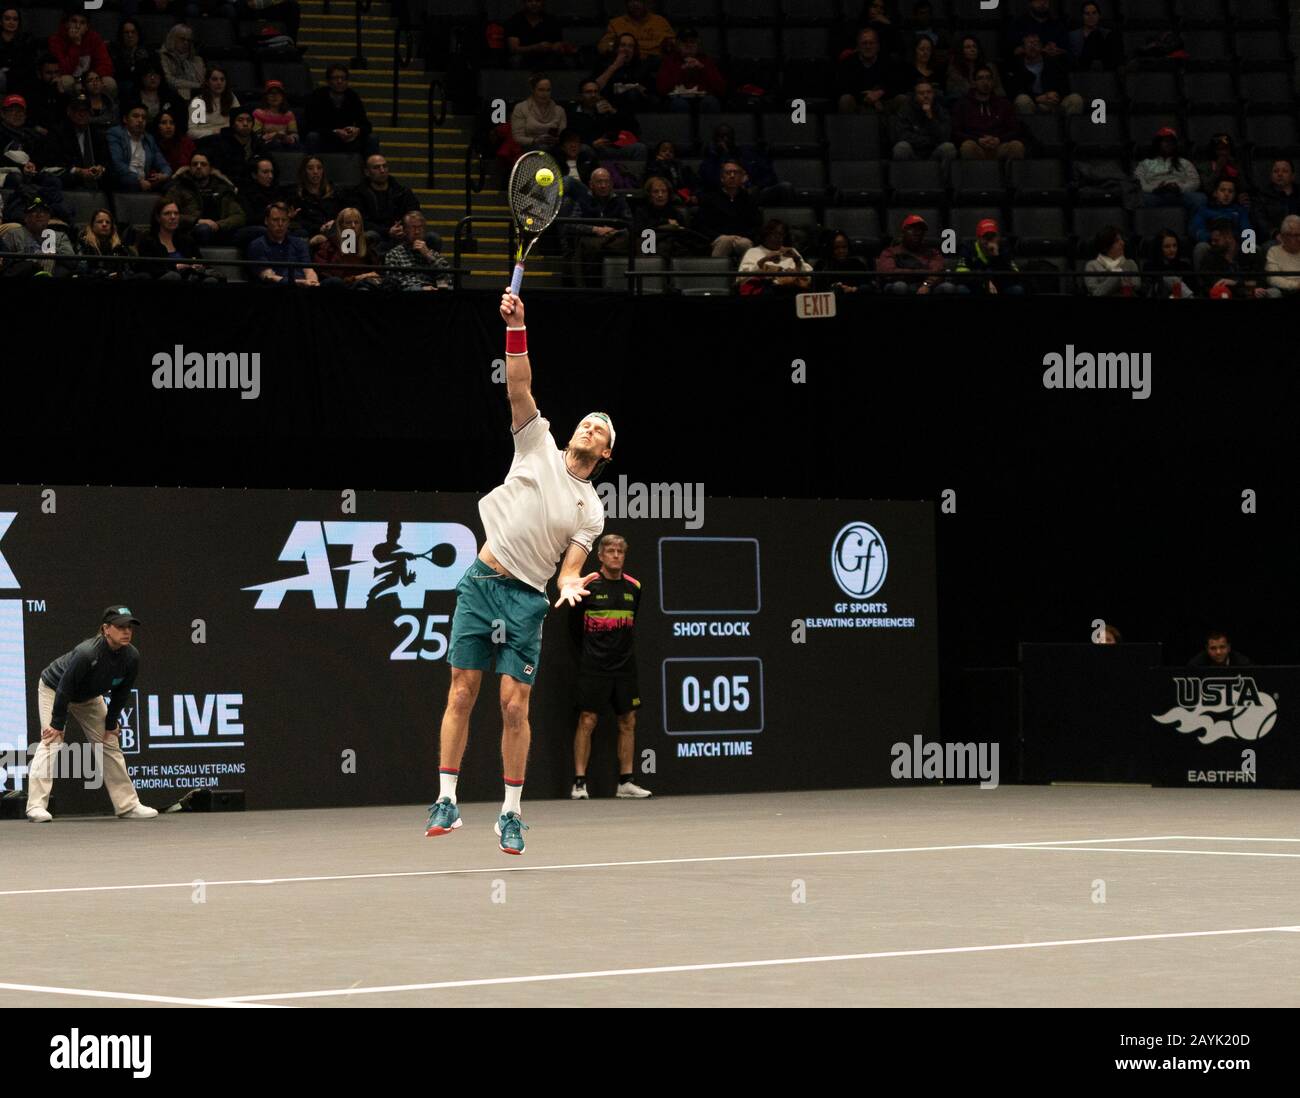 Hempstead, NY - February 15, 2020: Andreas Seppi of Italy serves during  semifinal match against Jason Jung